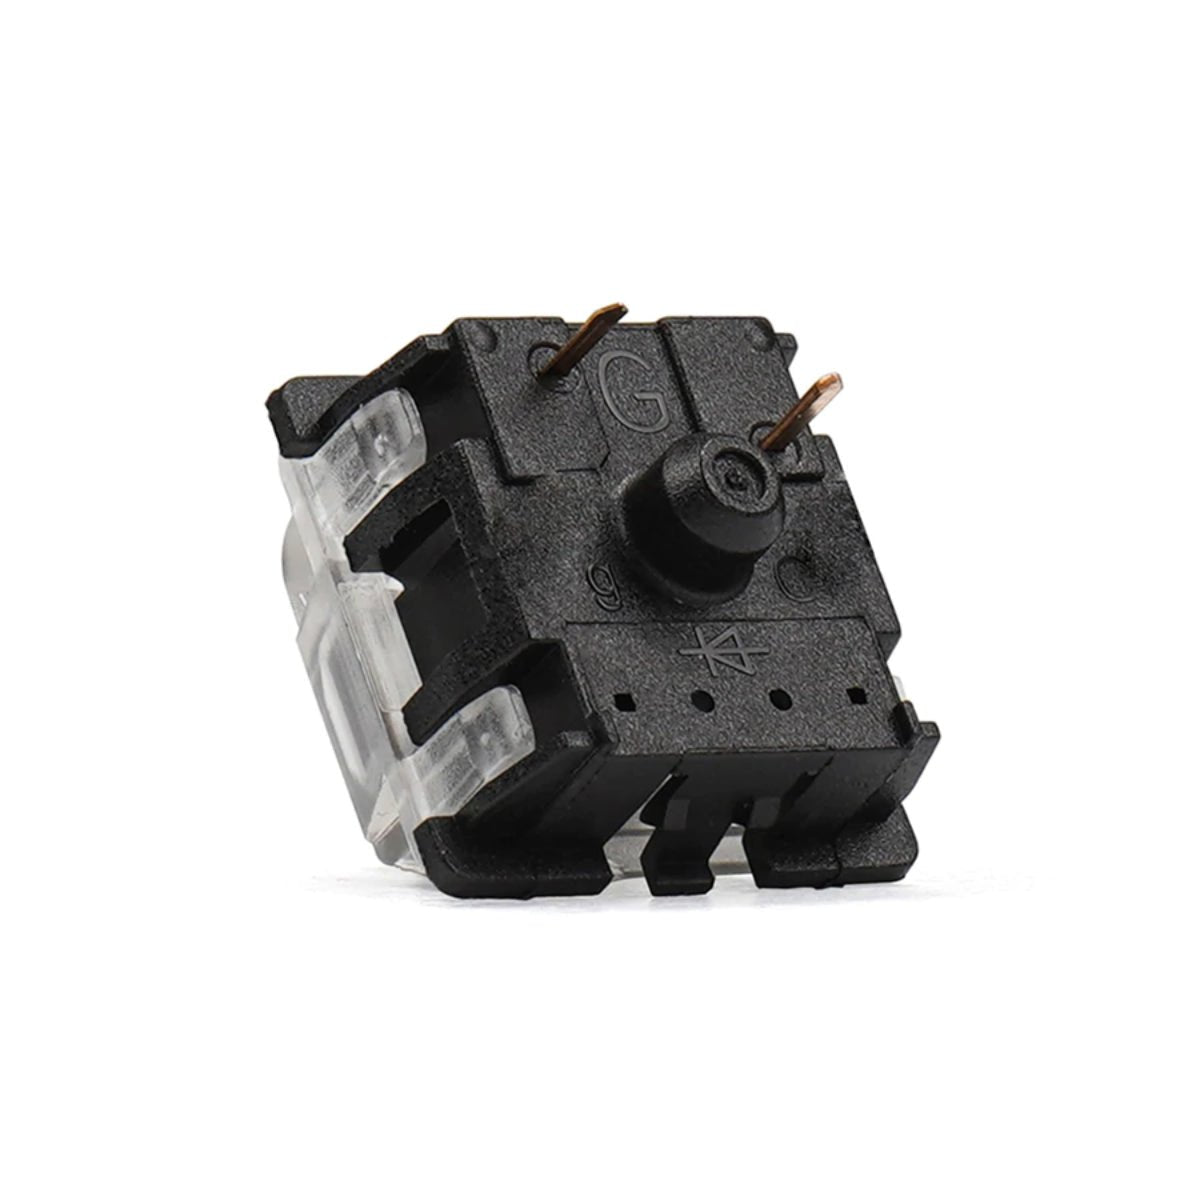 KBD Fans Gateron Linear Switches 3 Pin - Clear - Store 974 | ستور ٩٧٤